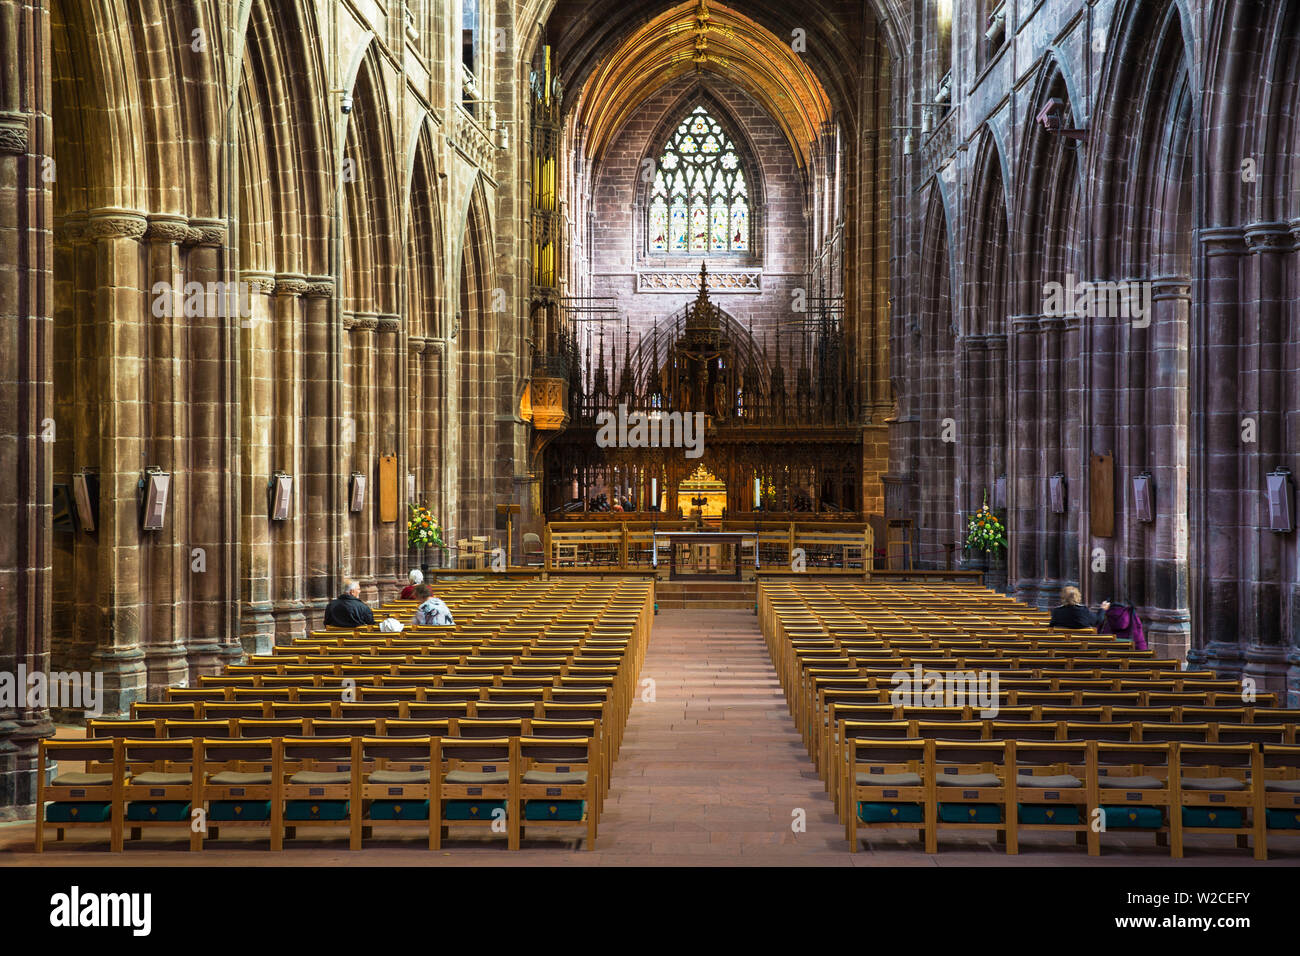 United Kingdom, England, Cheshire, Chester, Chester Cathedral, The Nave Stock Photo